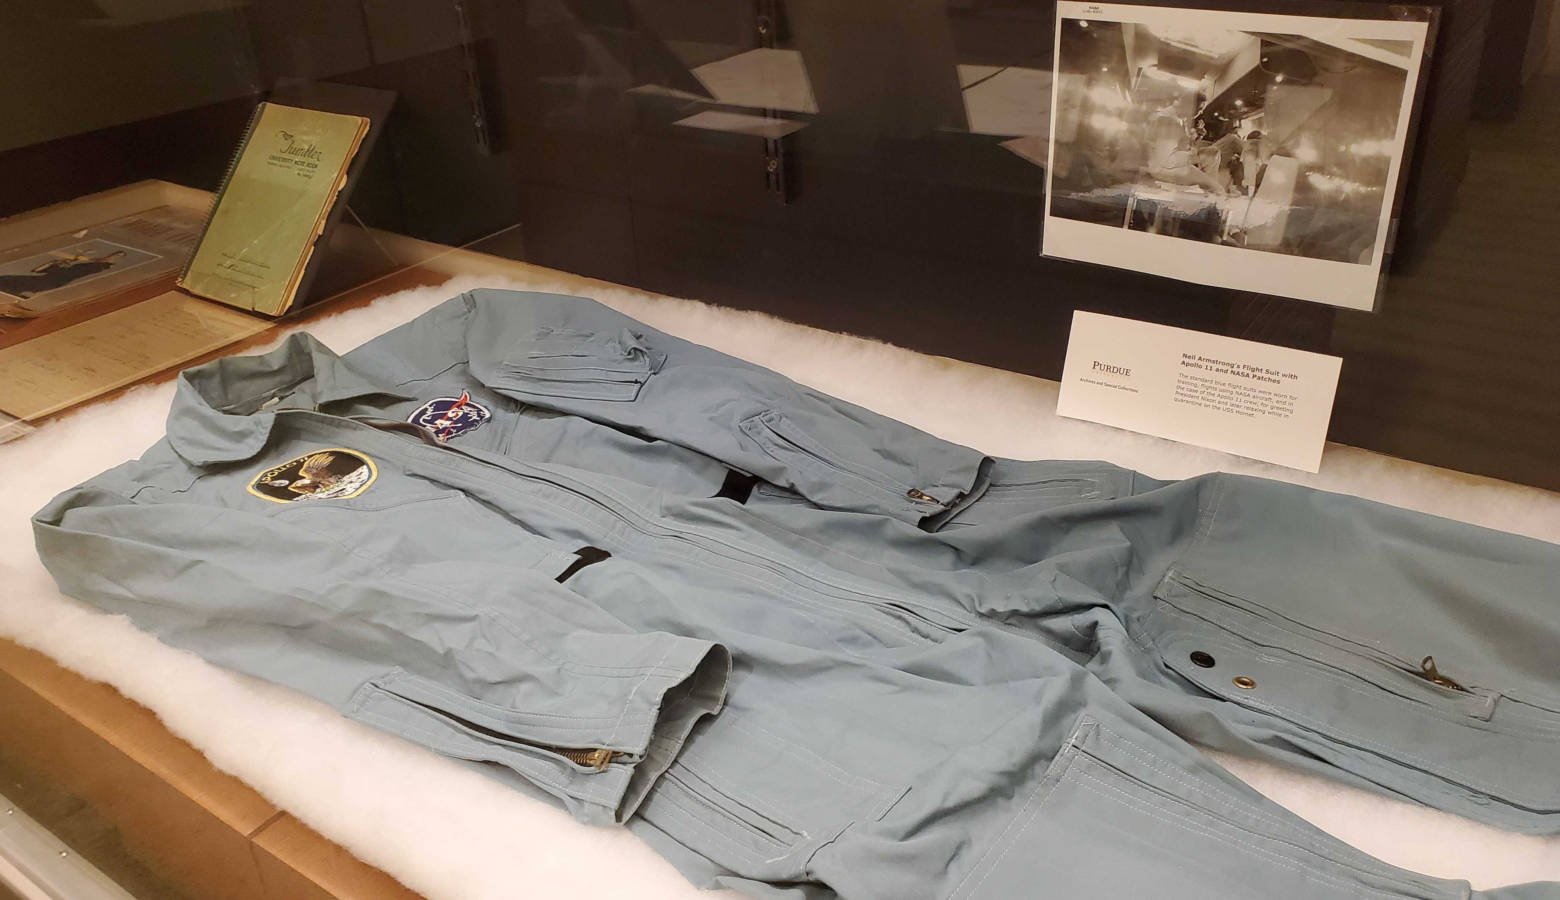 The exhibit includes one of Neil Armstrong's Apollo 11 training suits. (Samantha Horton/IPB News)